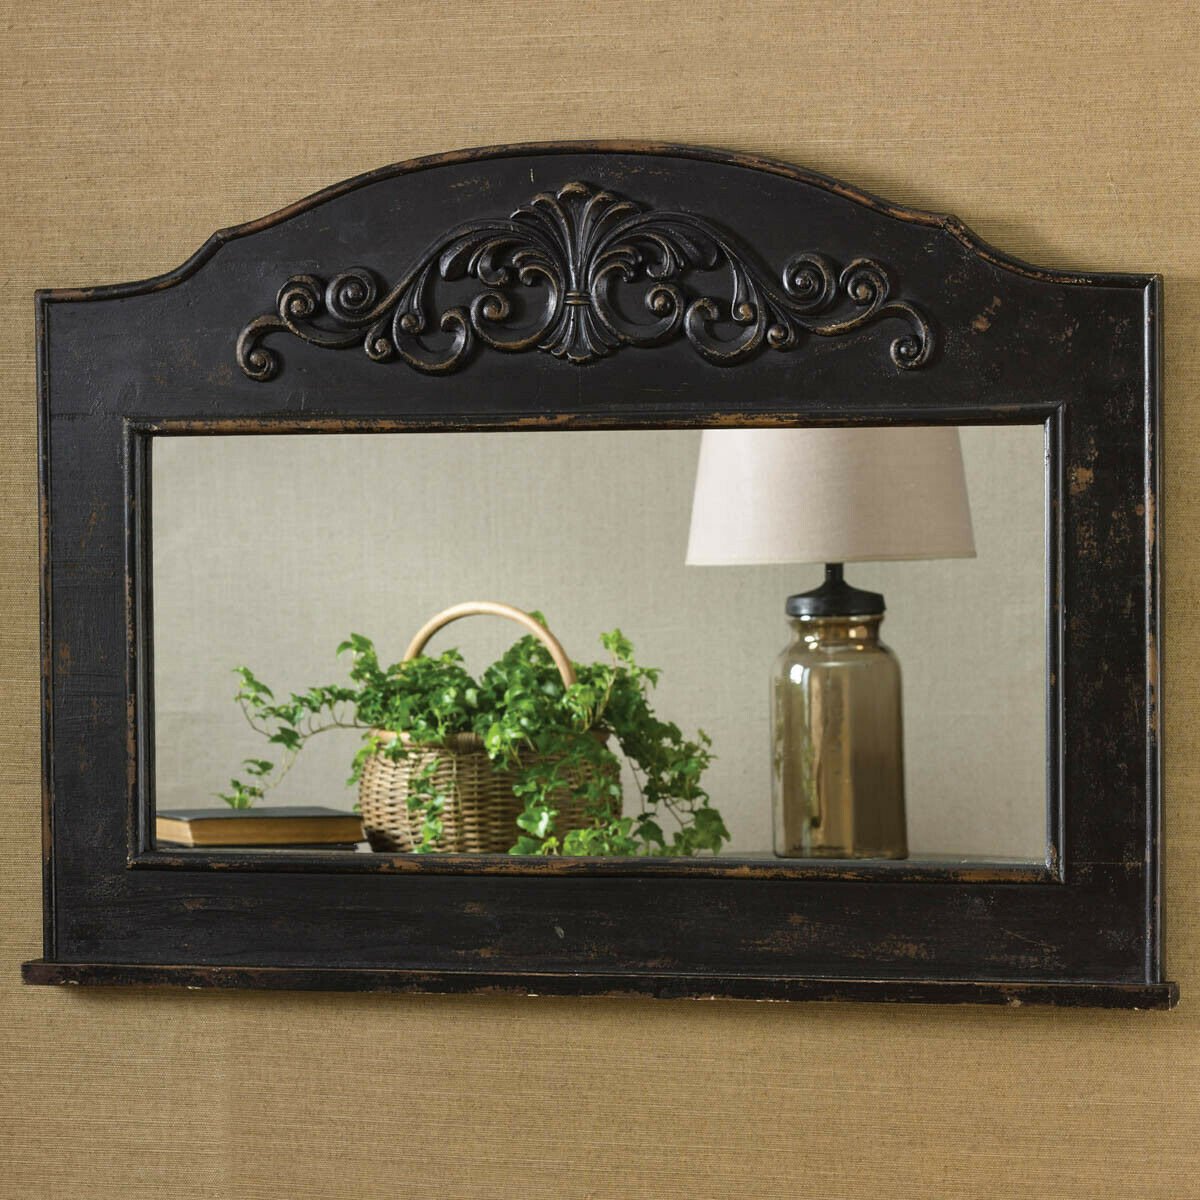 Primitive/Country Distressed Black Mantle Mirror Farmhouse - The Primitive Pineapple Collection